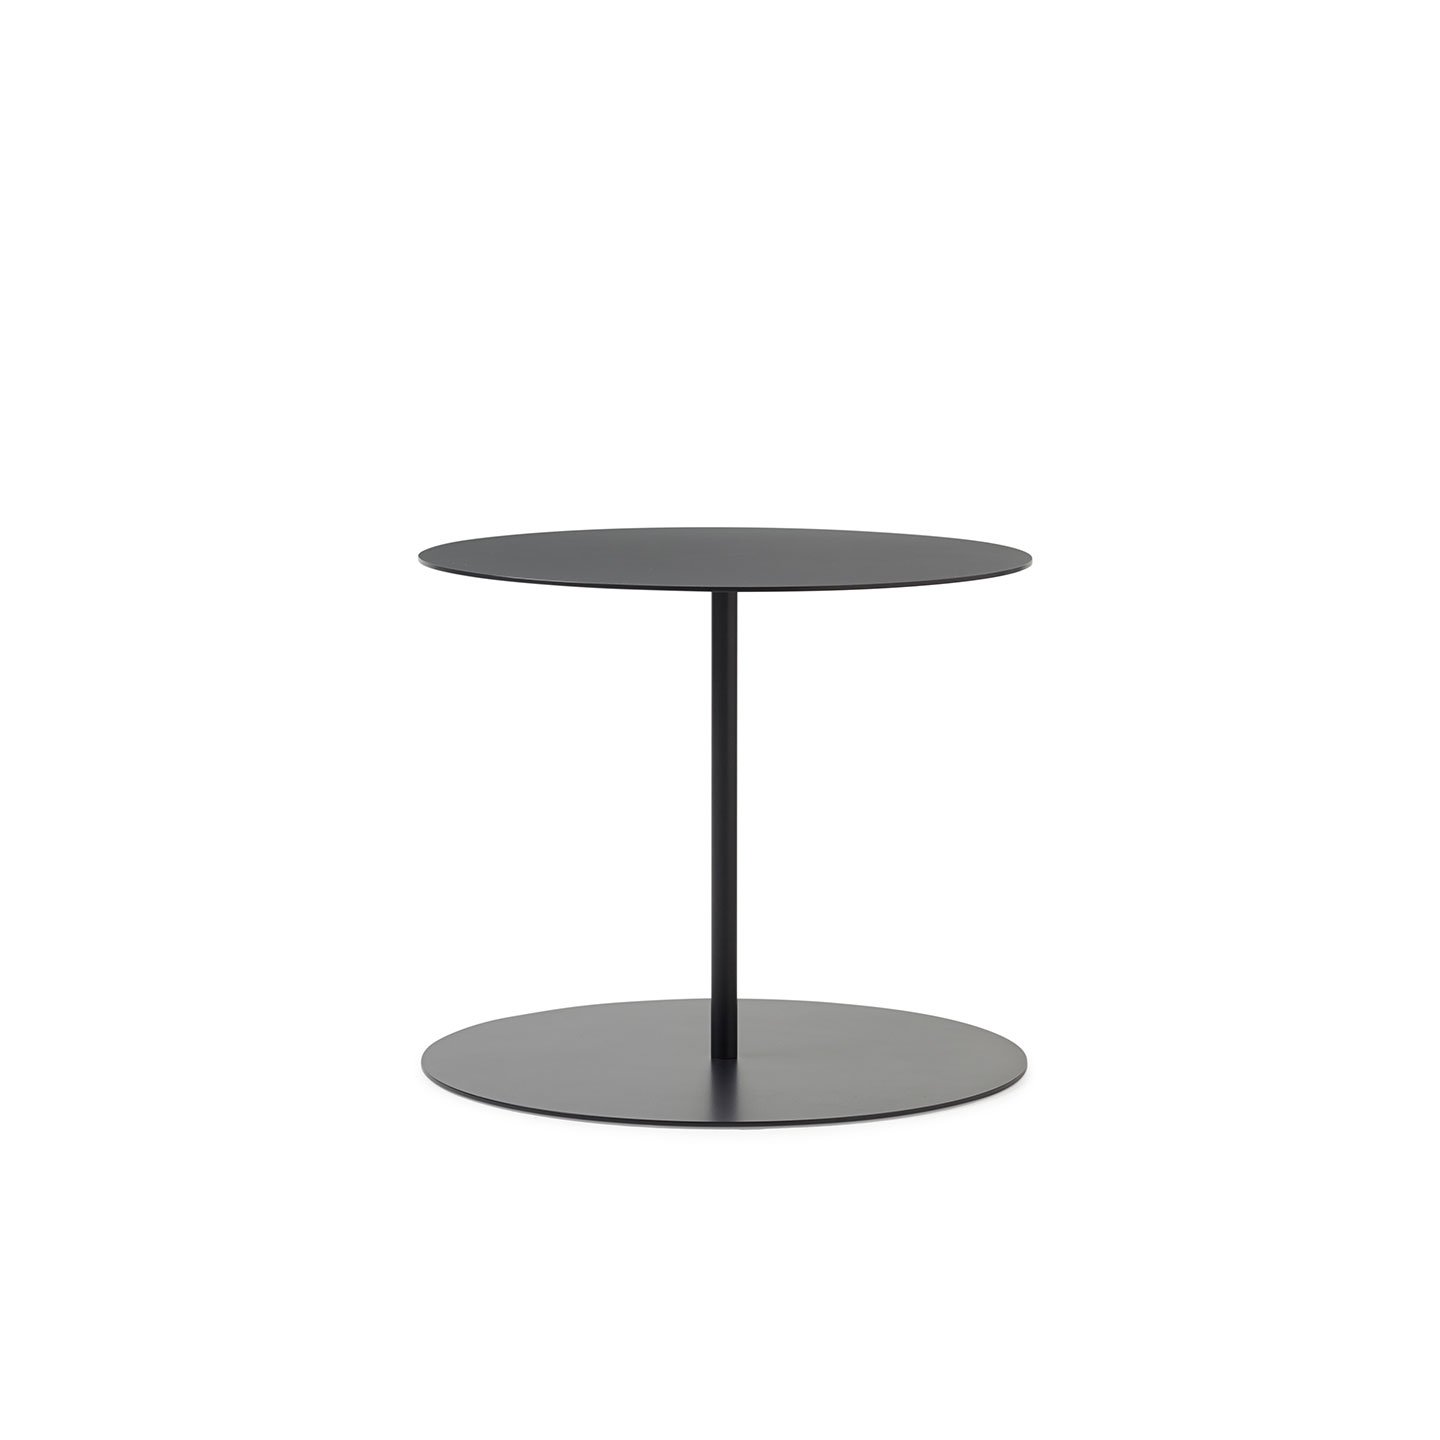 Haworth gong table with circular base and top in black